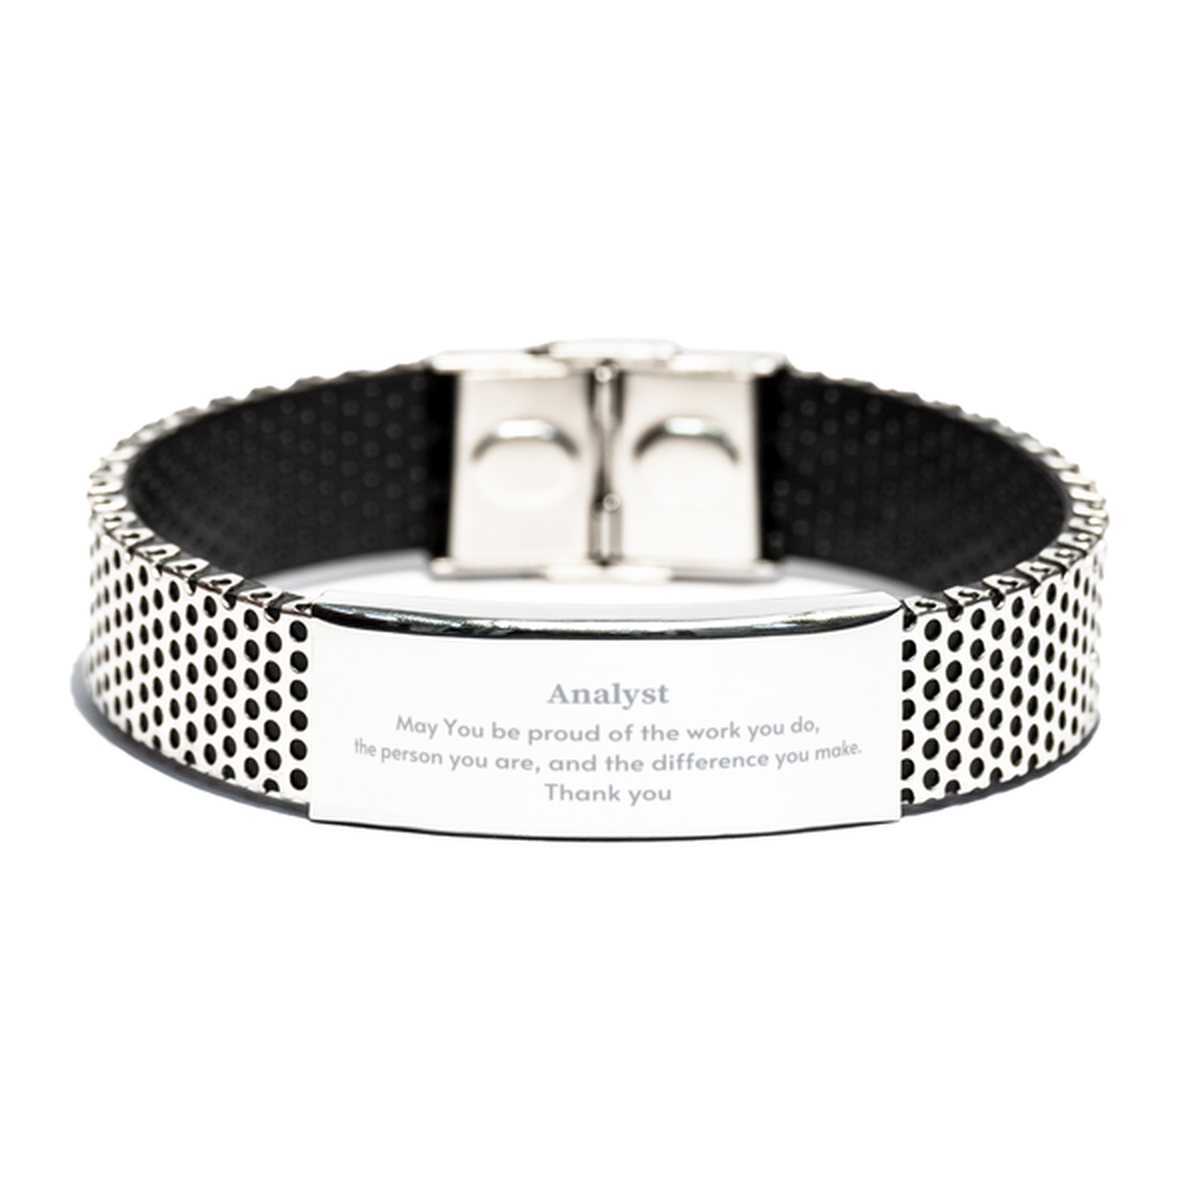 Heartwarming Stainless Steel Bracelet Retirement Coworkers Gifts for Analyst, Analyst May You be proud of the work you do, the person you are Gifts for Boss Men Women Friends